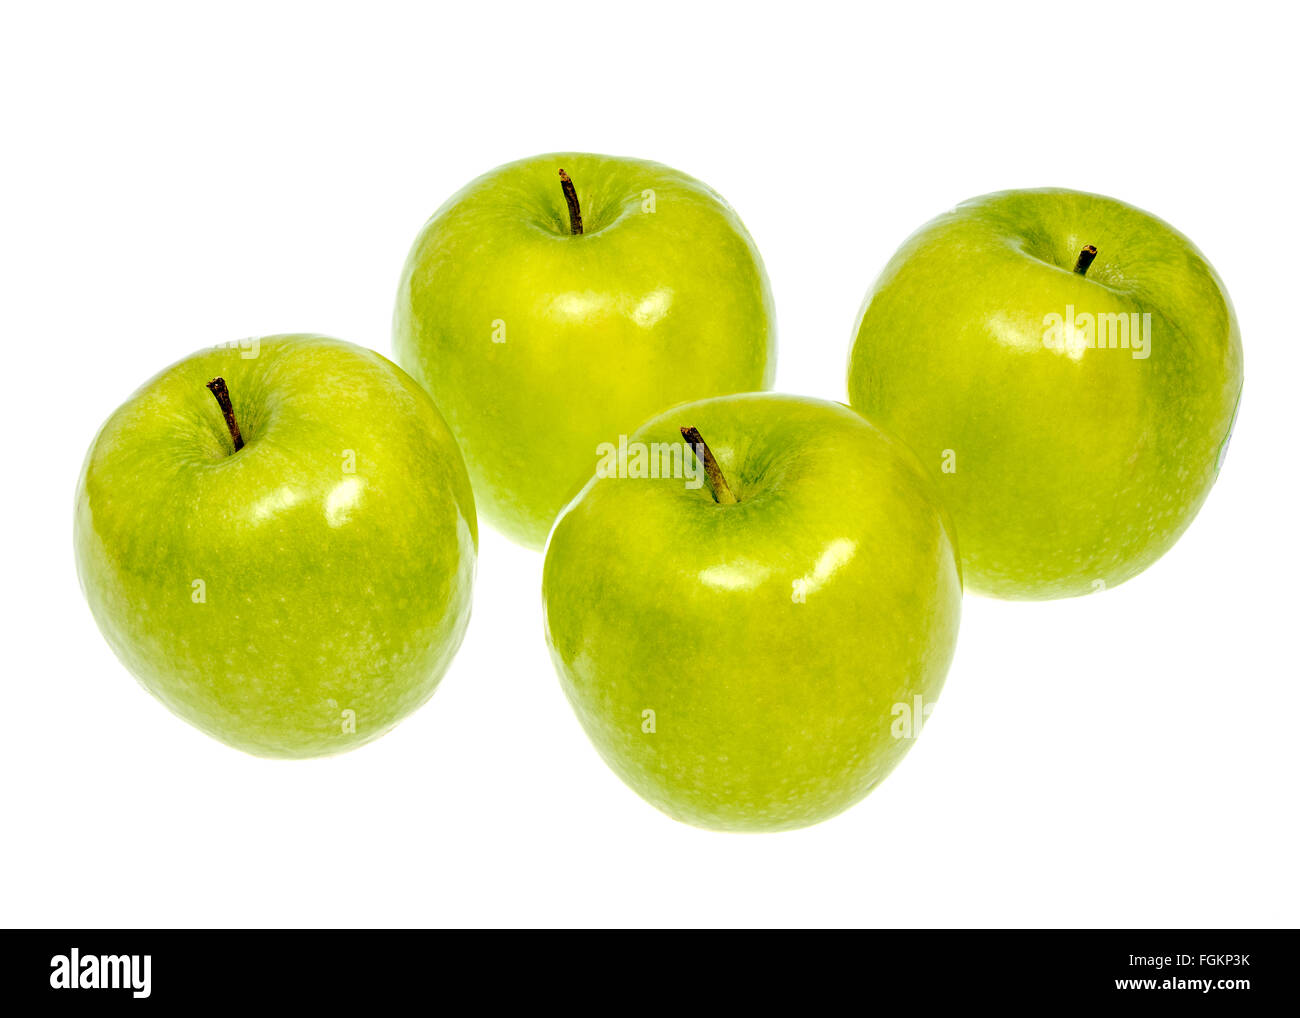 Four green apples on a white background Stock Photo